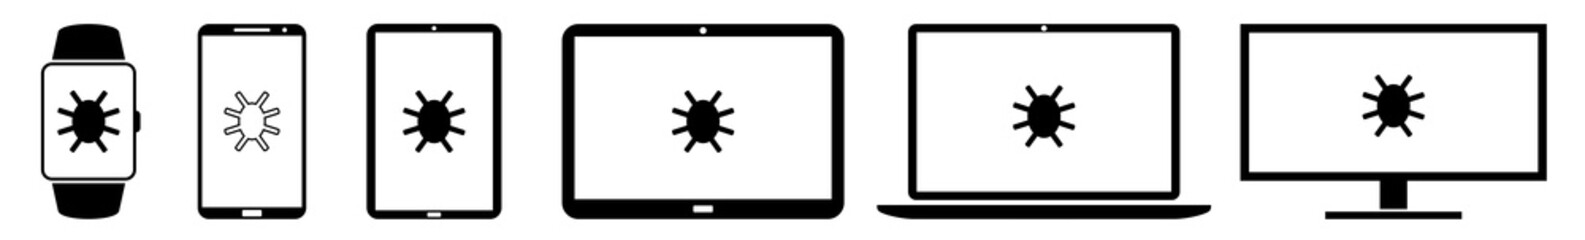 Display Bug, Bugs, Error, Insect Icon Devices Set | Web Screen Device Online | Laptop Vector Illustration | Mobile Phone | PC Computer Smartphone Tablet Sign Isolated